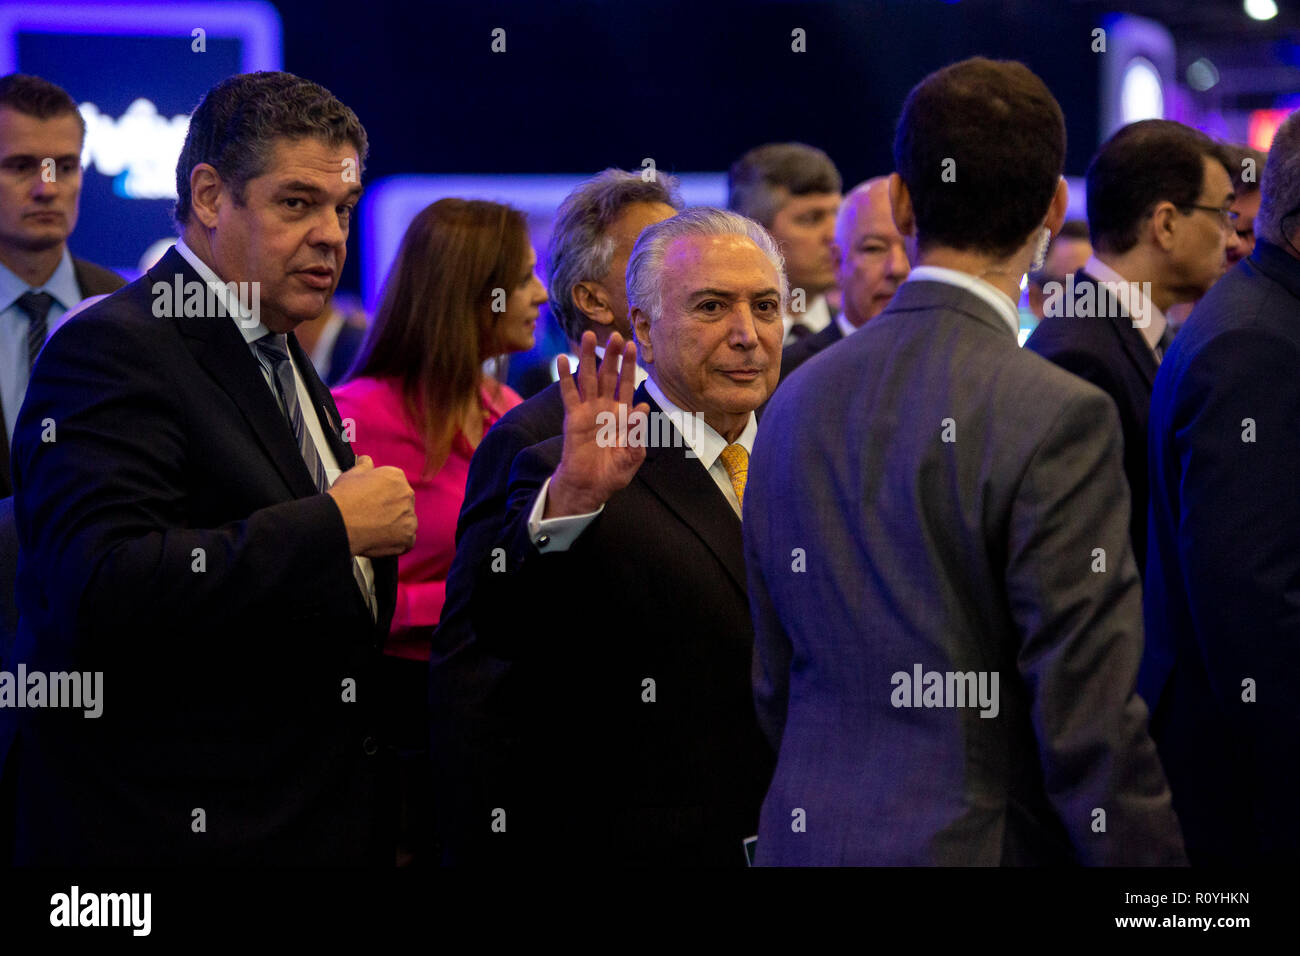 Sao Paulo, Brazil. 8th November, 2018. Michel Temer opening of the International Automobile Show - President Michel Temer will take part this Thursday 8th, the official opening of the 30th edition of the Sao Paulo International Auto Show, at Sao Paulo Expo , the event takes place from 8 to 18 this month, are about 540 vehicles exhibited distributed in 50 brands in a space of 110 thousand square meters. Photo: Suamy Beydoun / AGIF Credit: AGIF/Alamy Live News Stock Photo